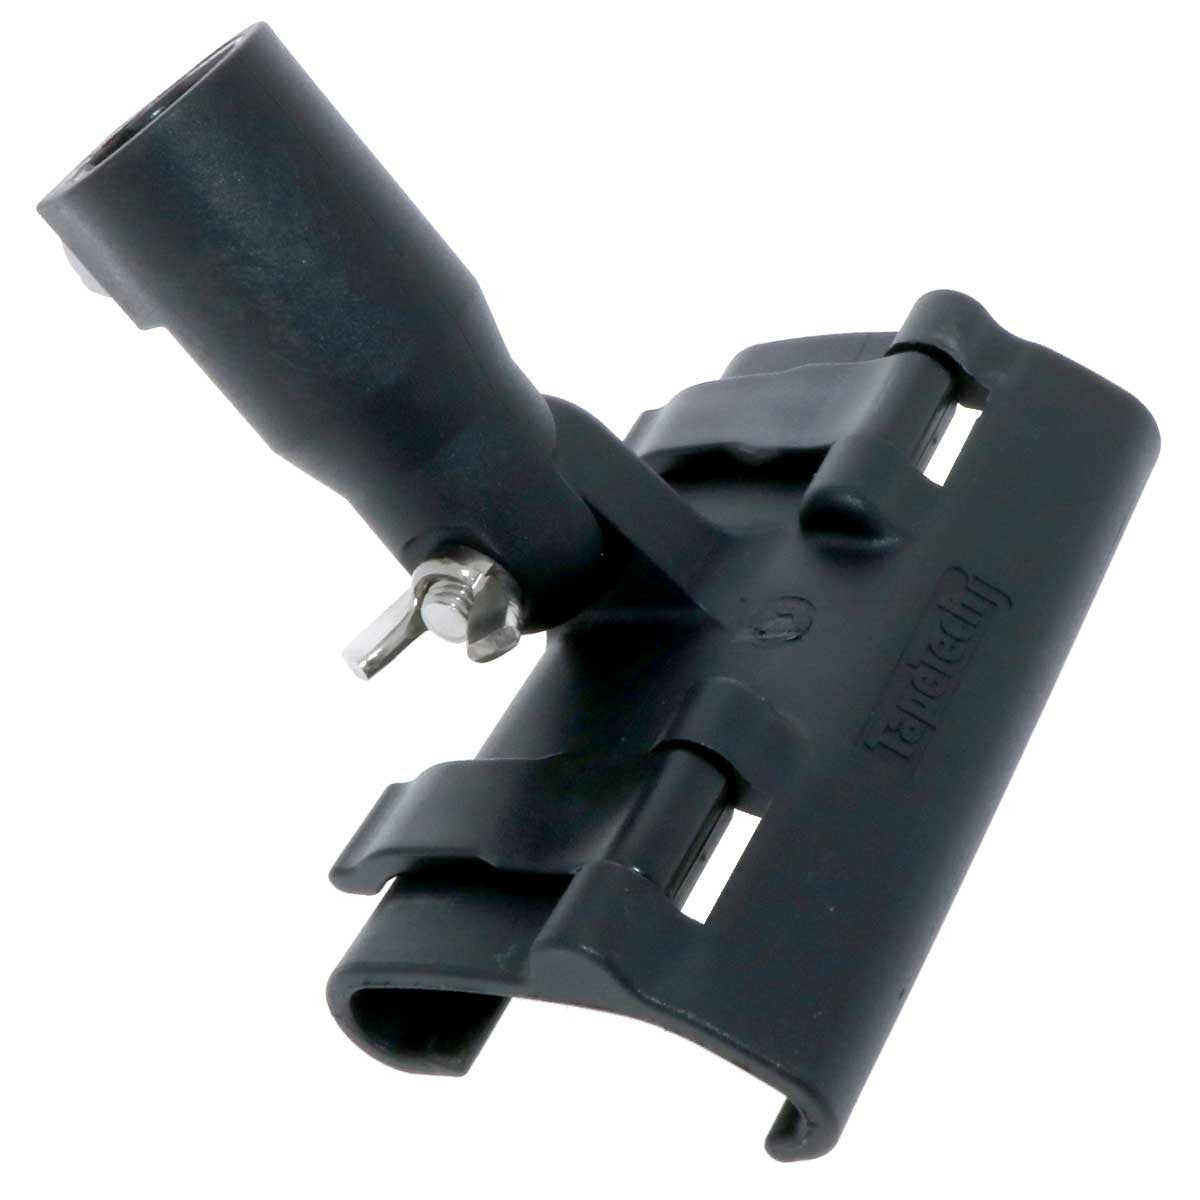 Tapetech Extension Handle Adaptor